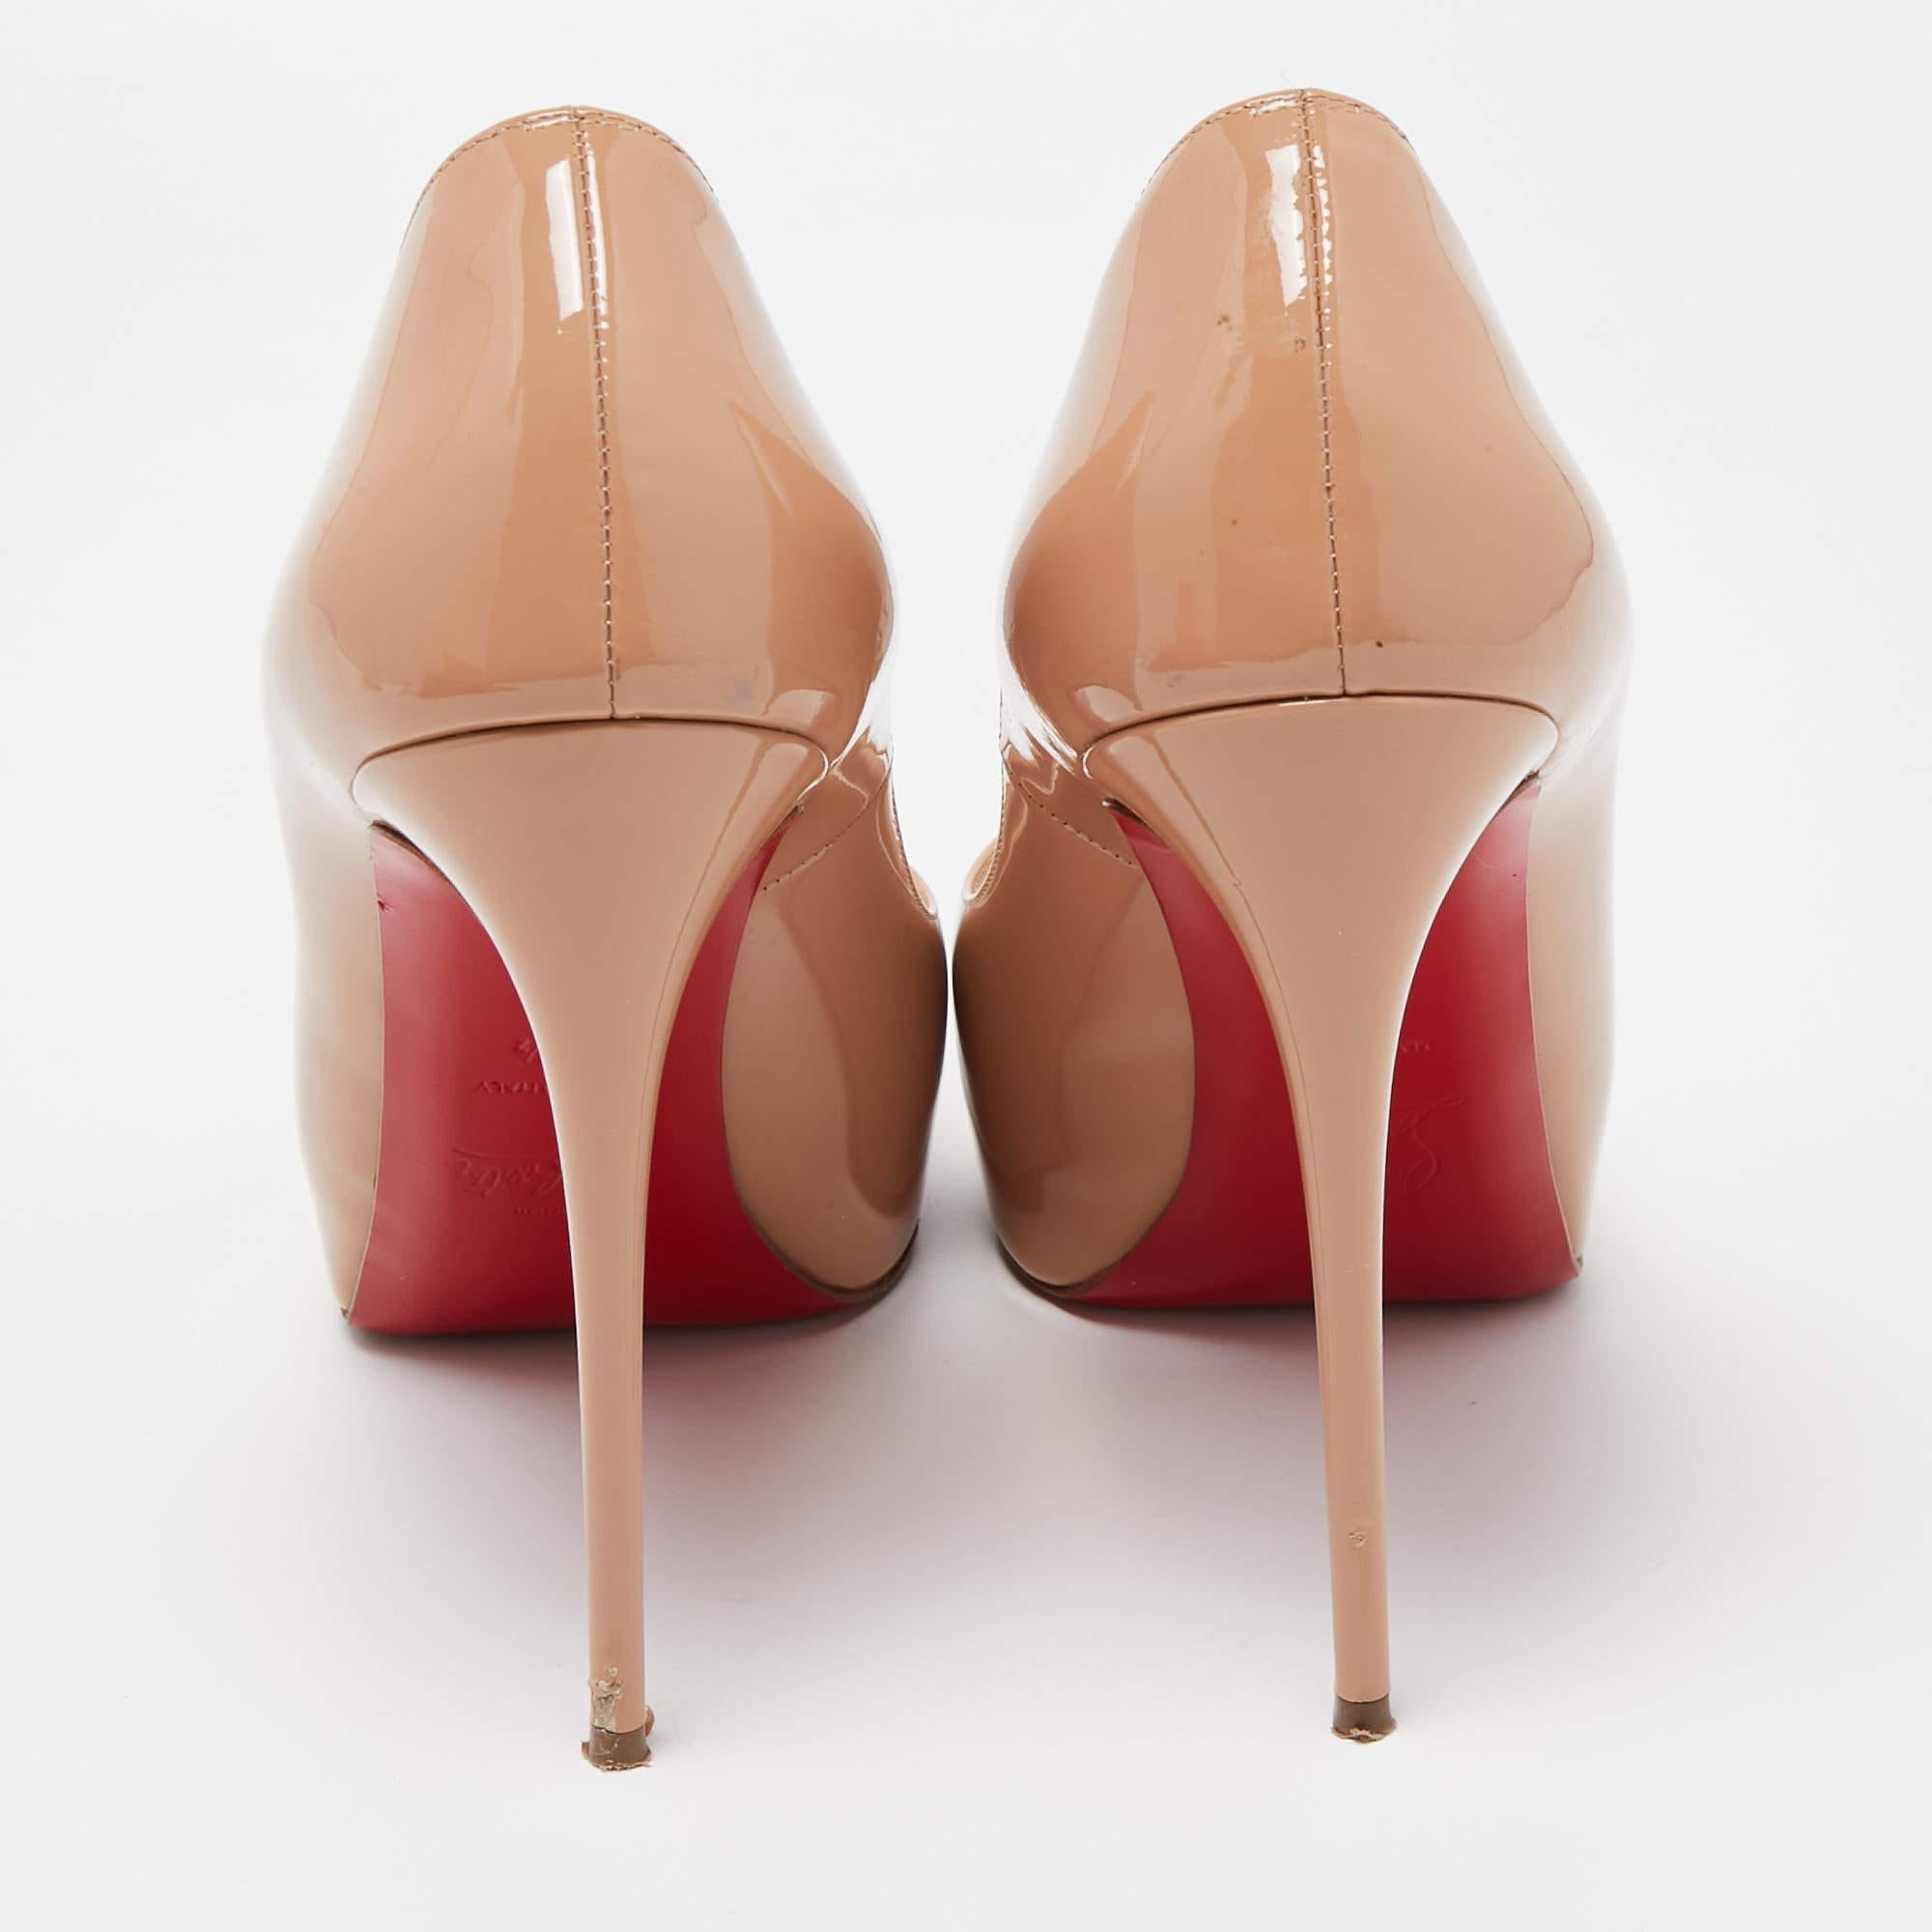 Christian Louboutin Beige Patent Very Prive Peep Toe Pumps Size 39.5 For Sale 3